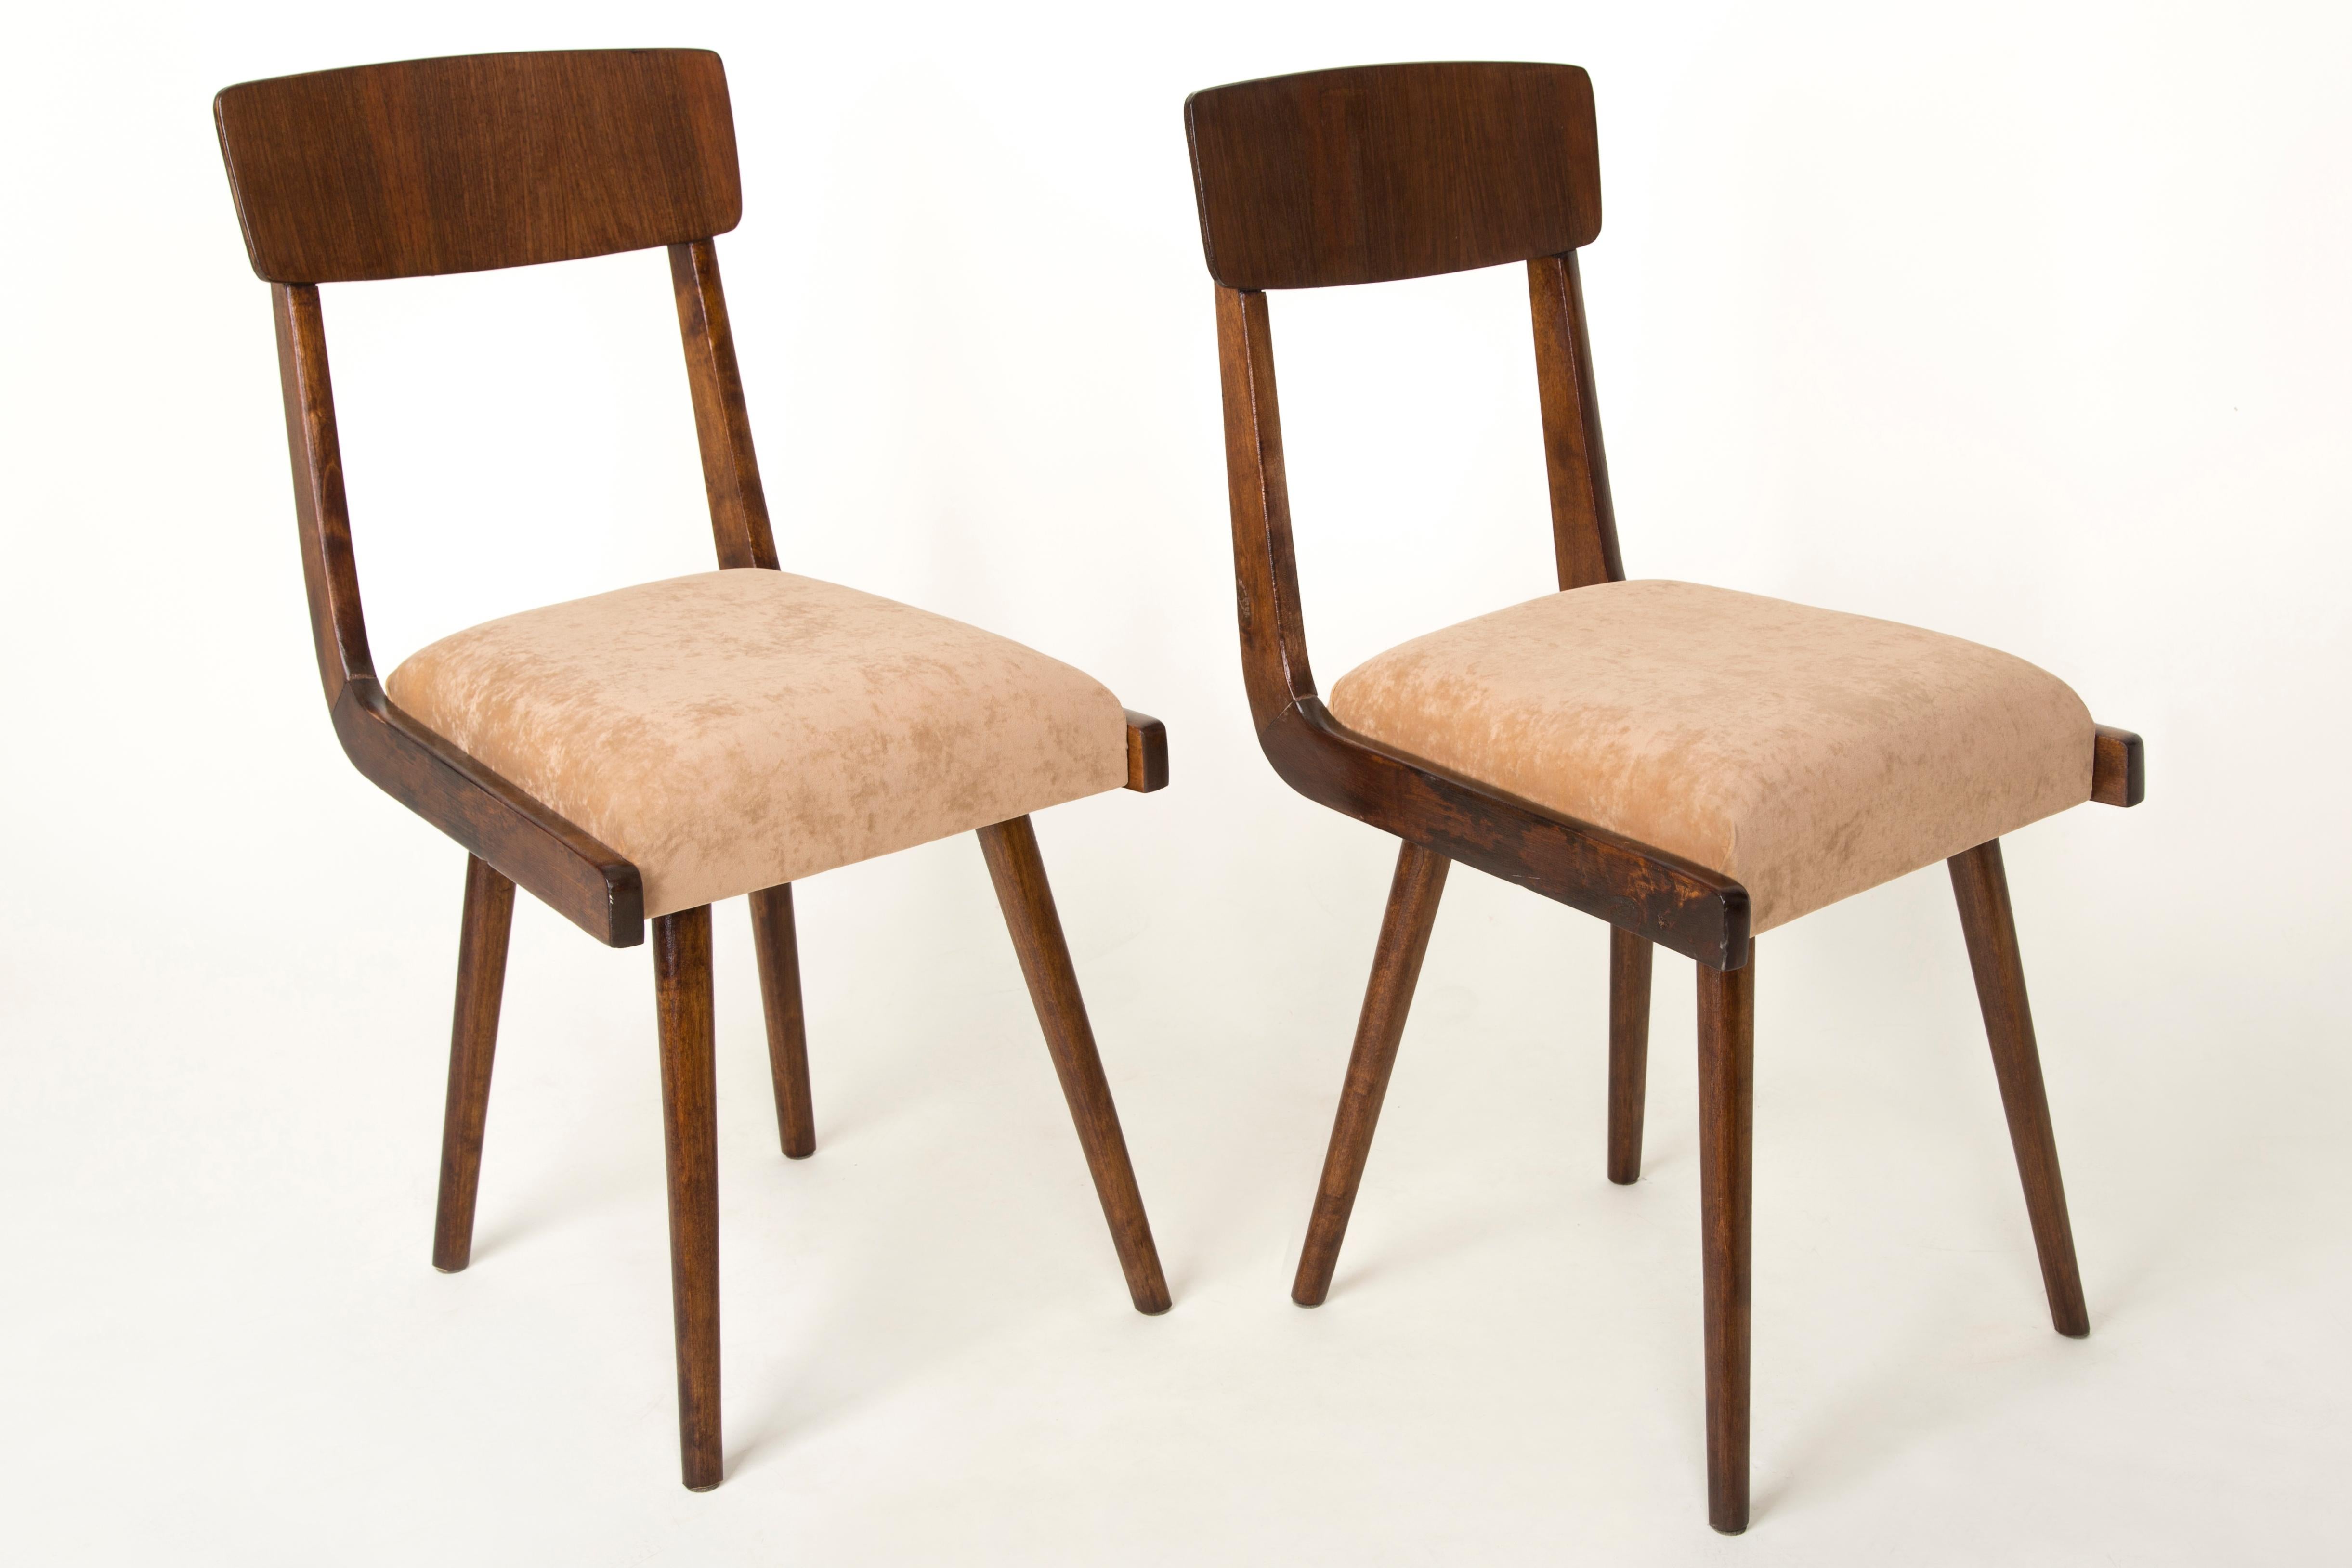 Polish Set of Four 20th Century Gazelle Beige Wood Chairs, 1960s For Sale